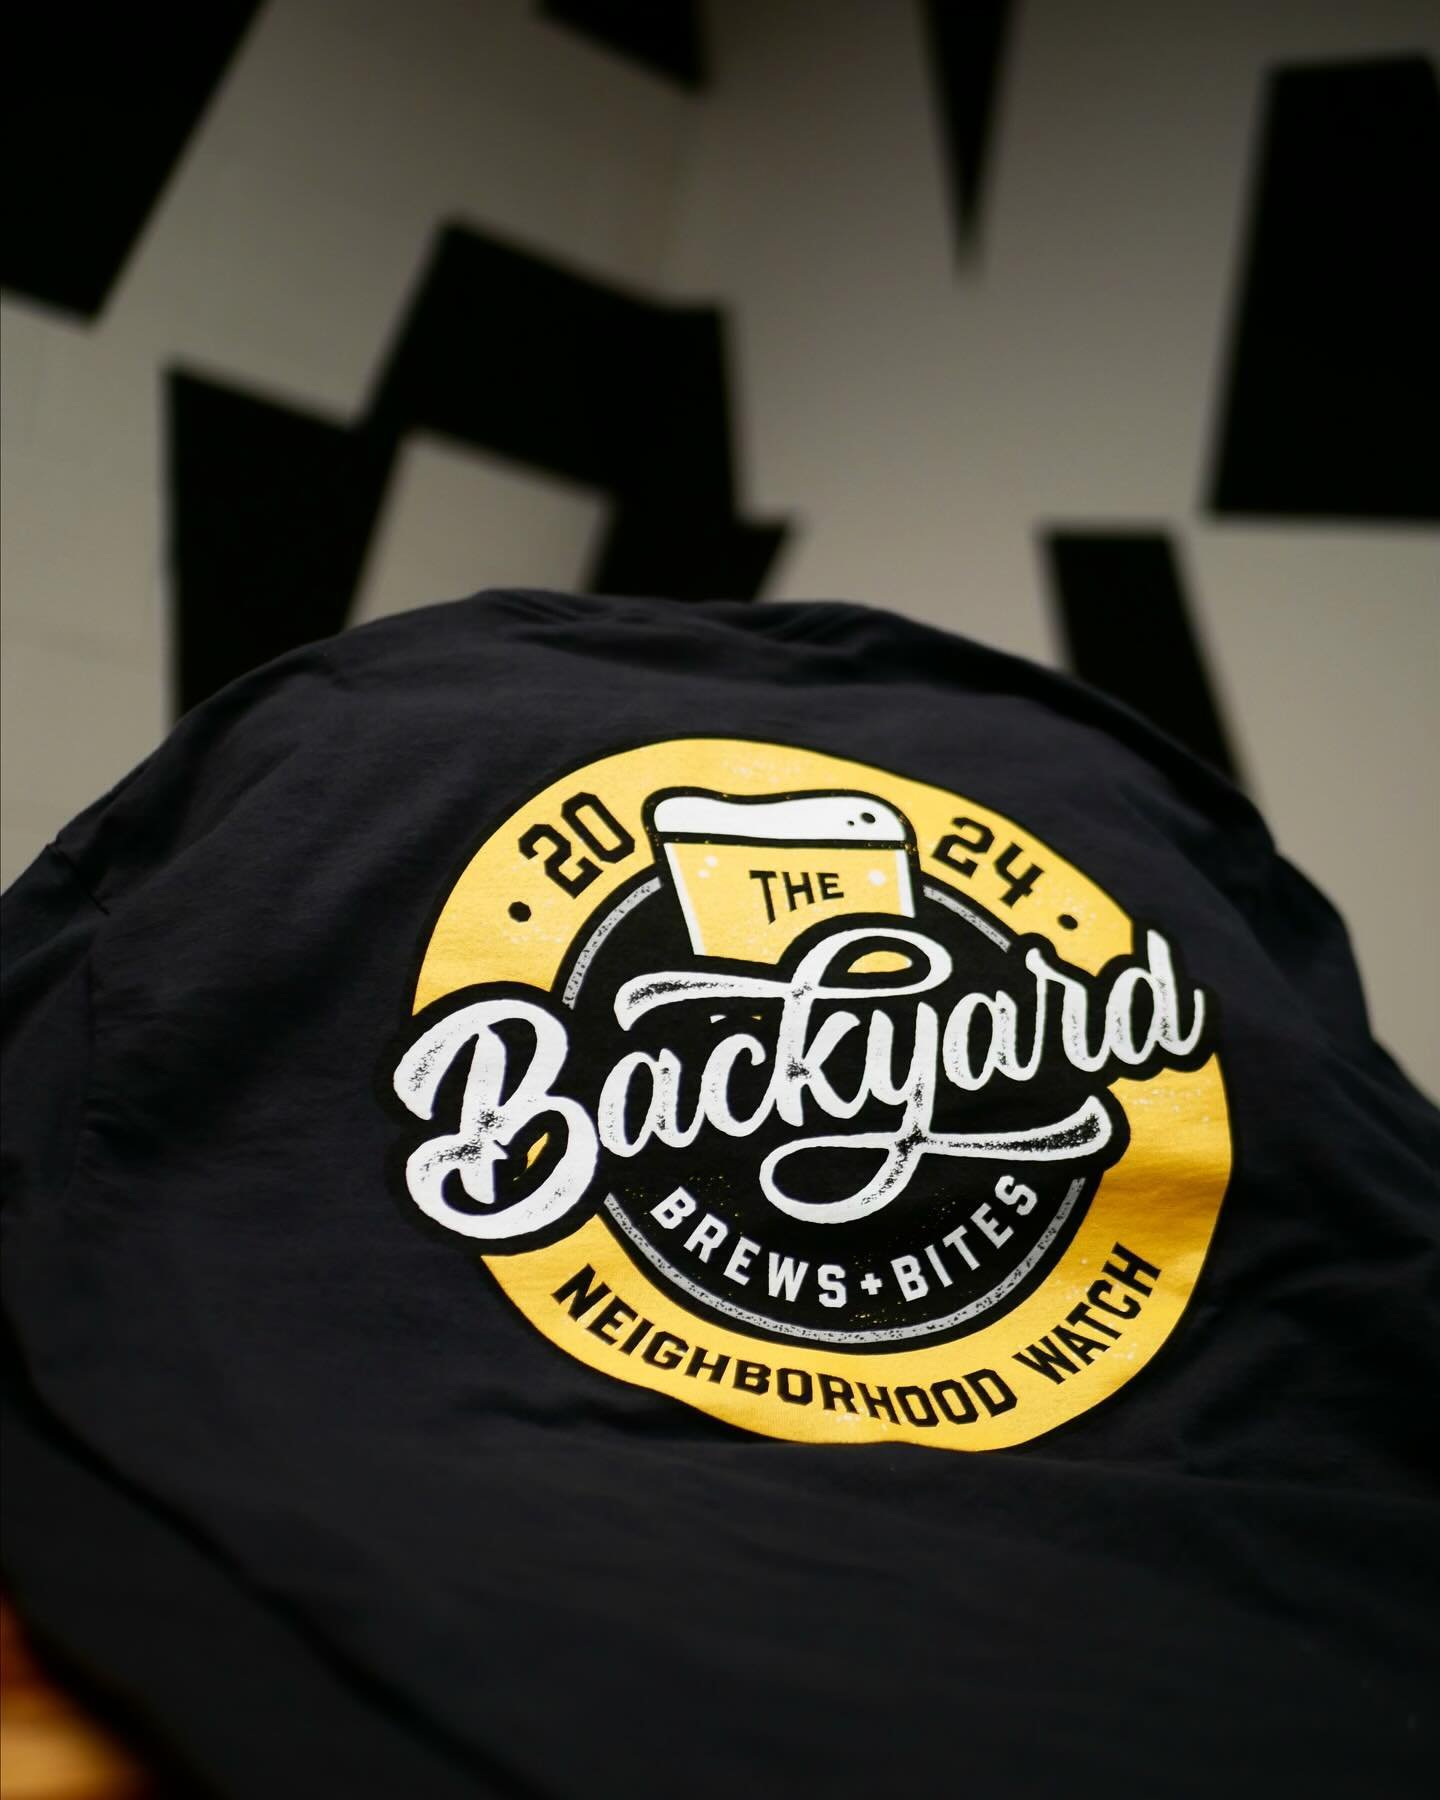 Another round of tees for @the_backyard_brews_and_bites ? Say less. 🍻

#brewery #beer #local #smallbusiness #screenprinting #custom #merch #tees #shirts #logo #williamsburgva #southhillva #virginia